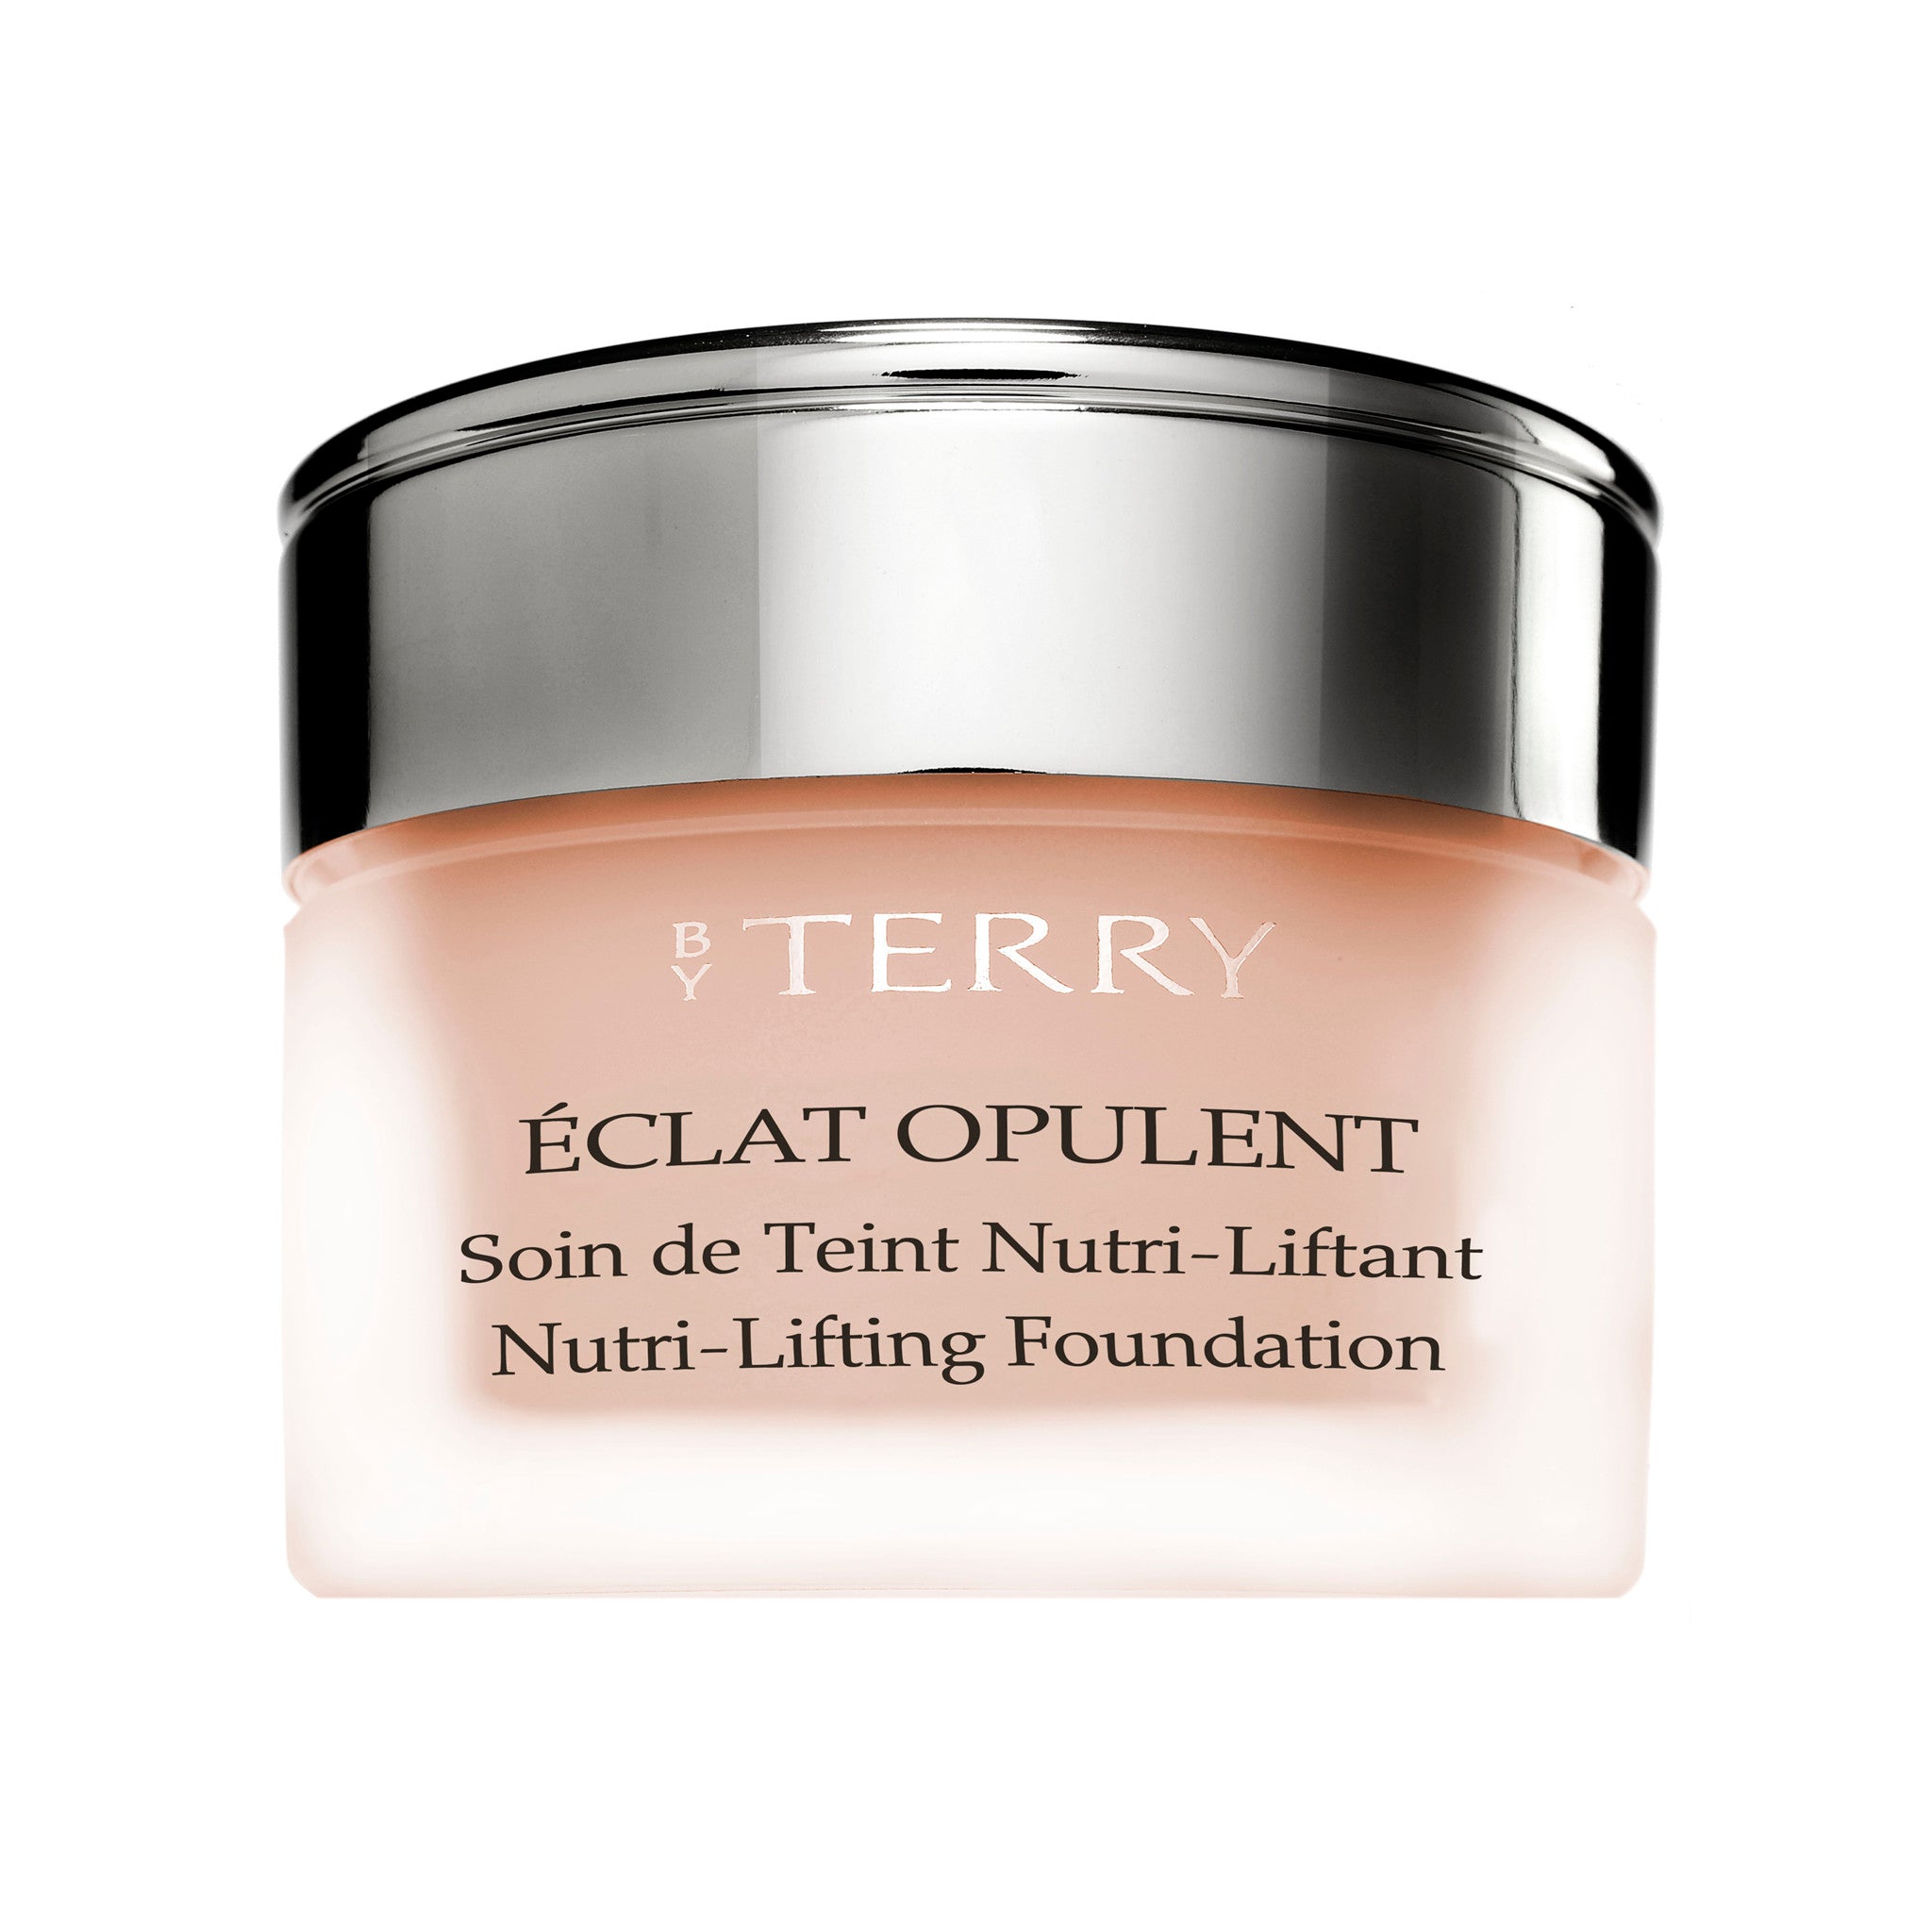 By Terry Eclat Opulent Color/Shade variant: Eclat Naturel main image. This product is for light cool peach complexions